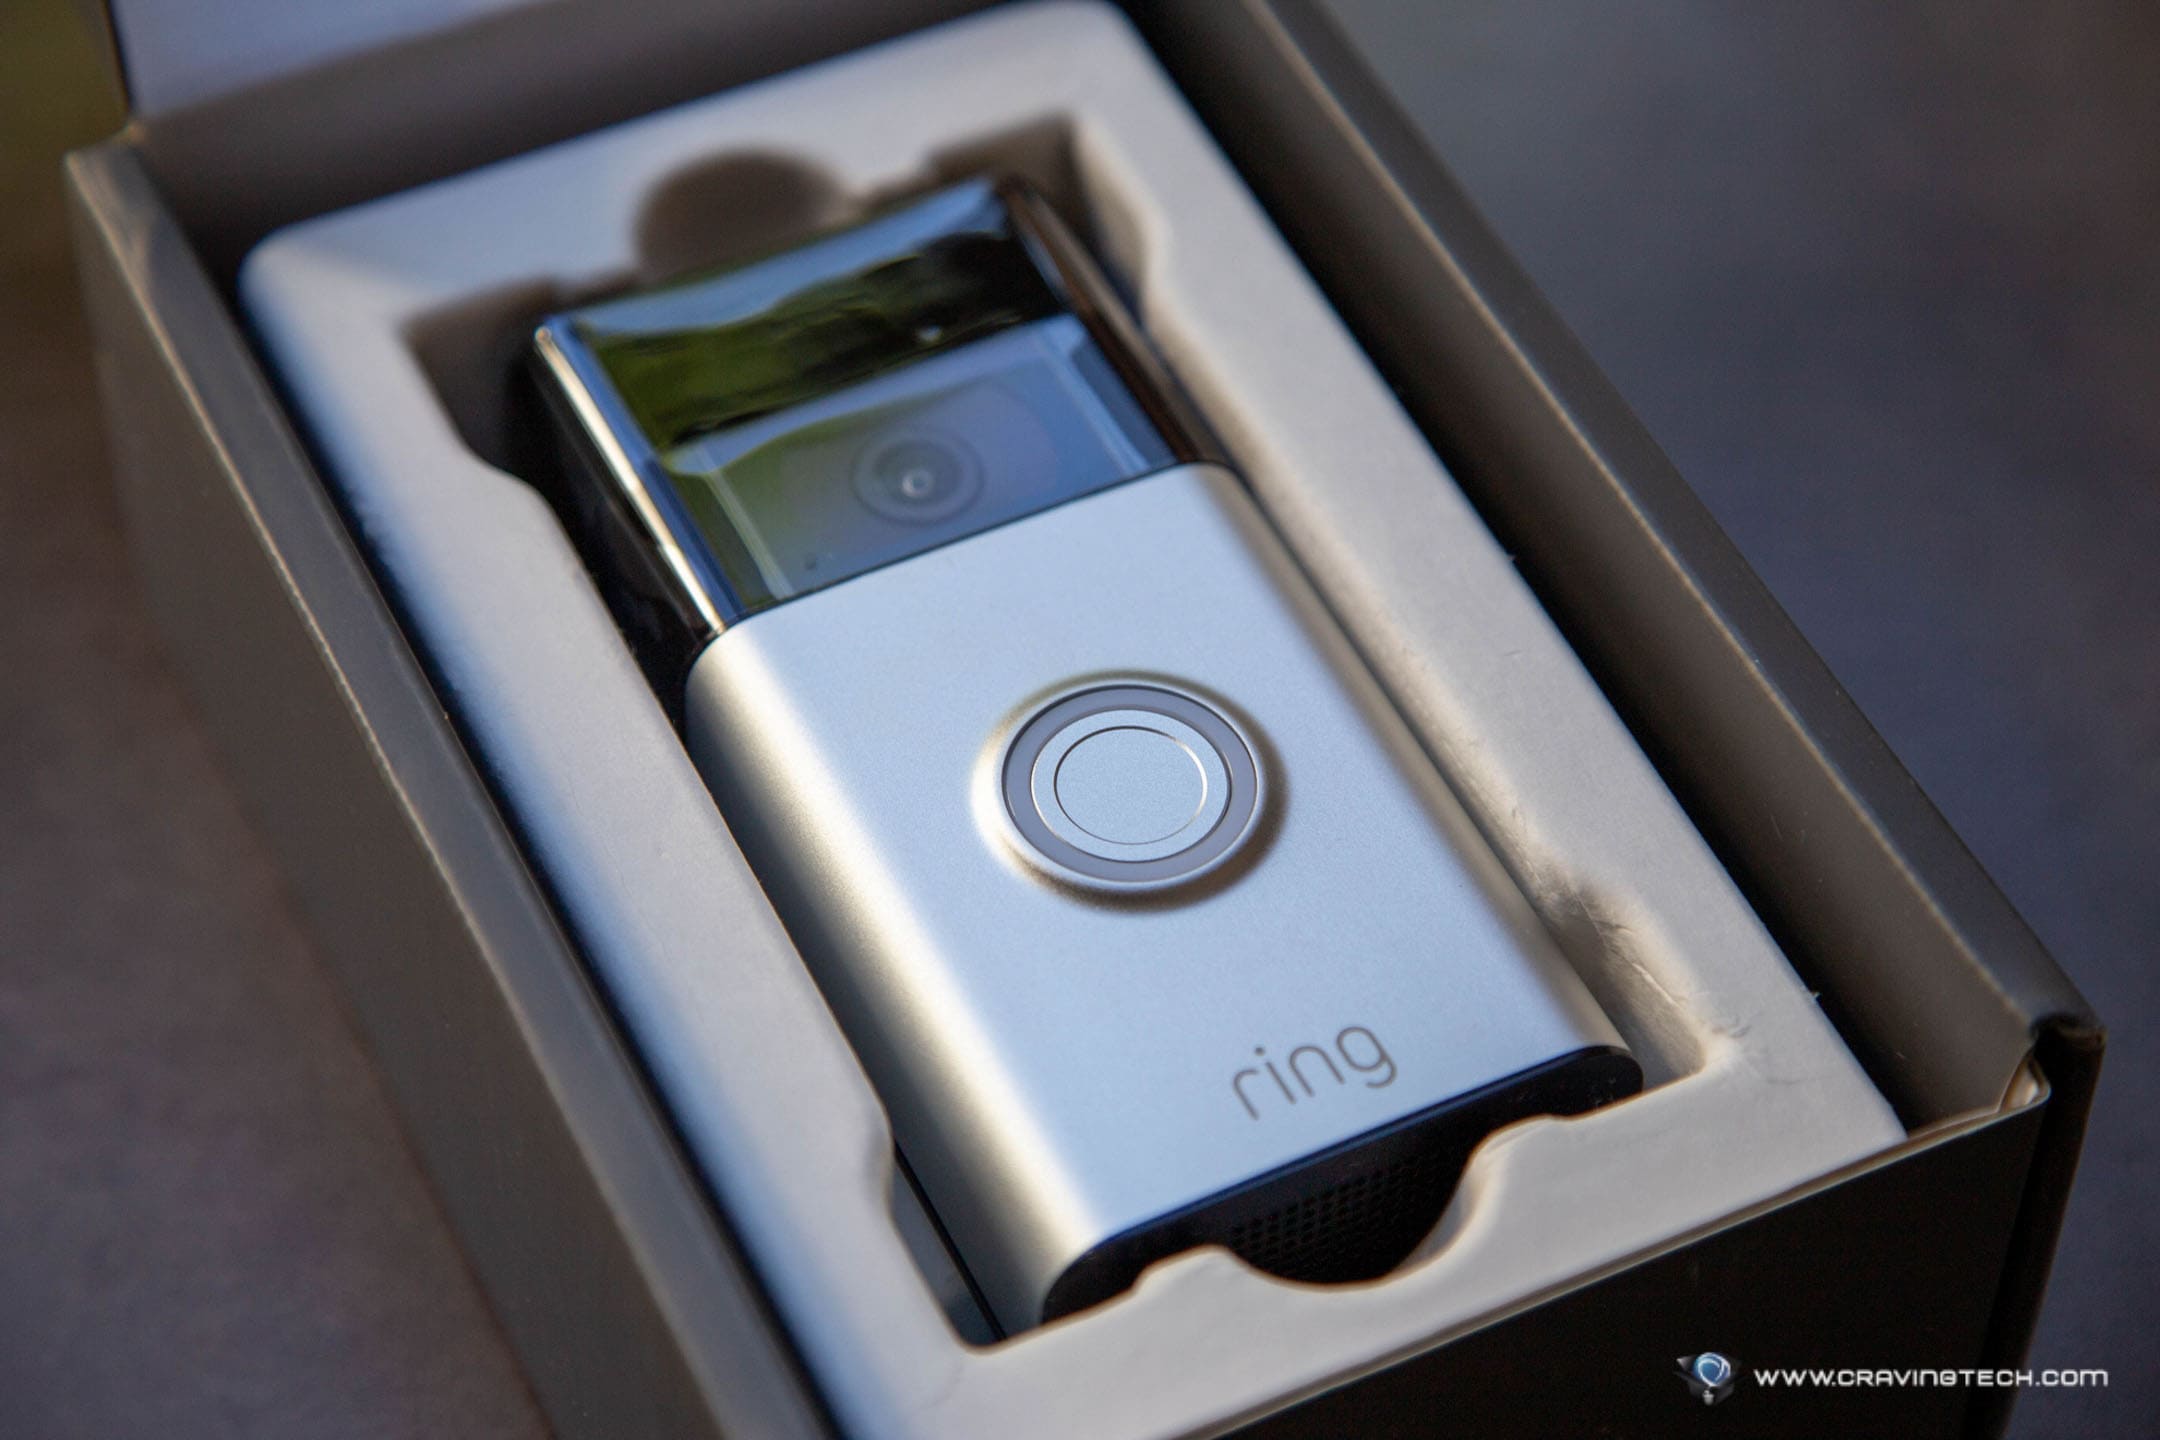 Ring's second-gen Video Doorbell brings better video quality for just $100  - CNET